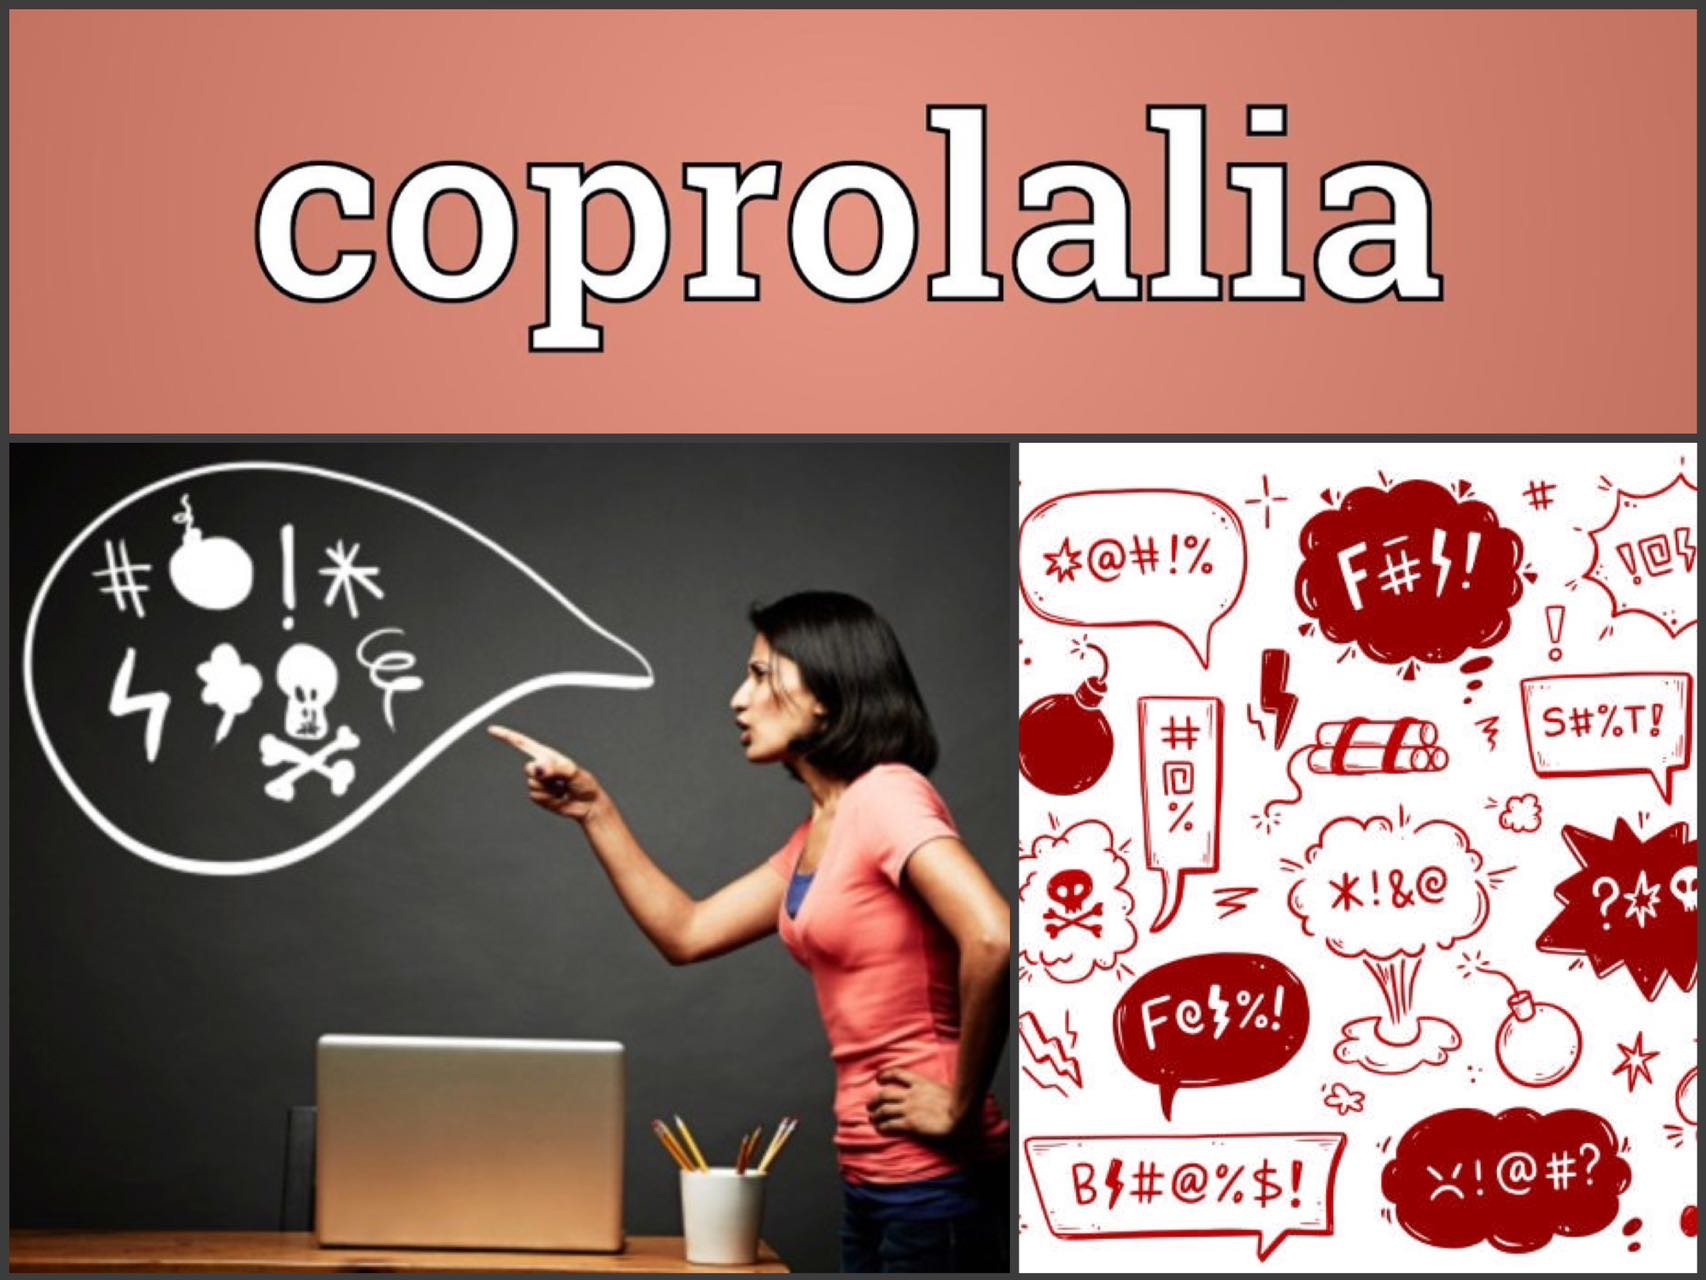 Dajiang: People with more severe forms of Tourette's have a symptom called coprolalia, othewise known as the swearing tic.